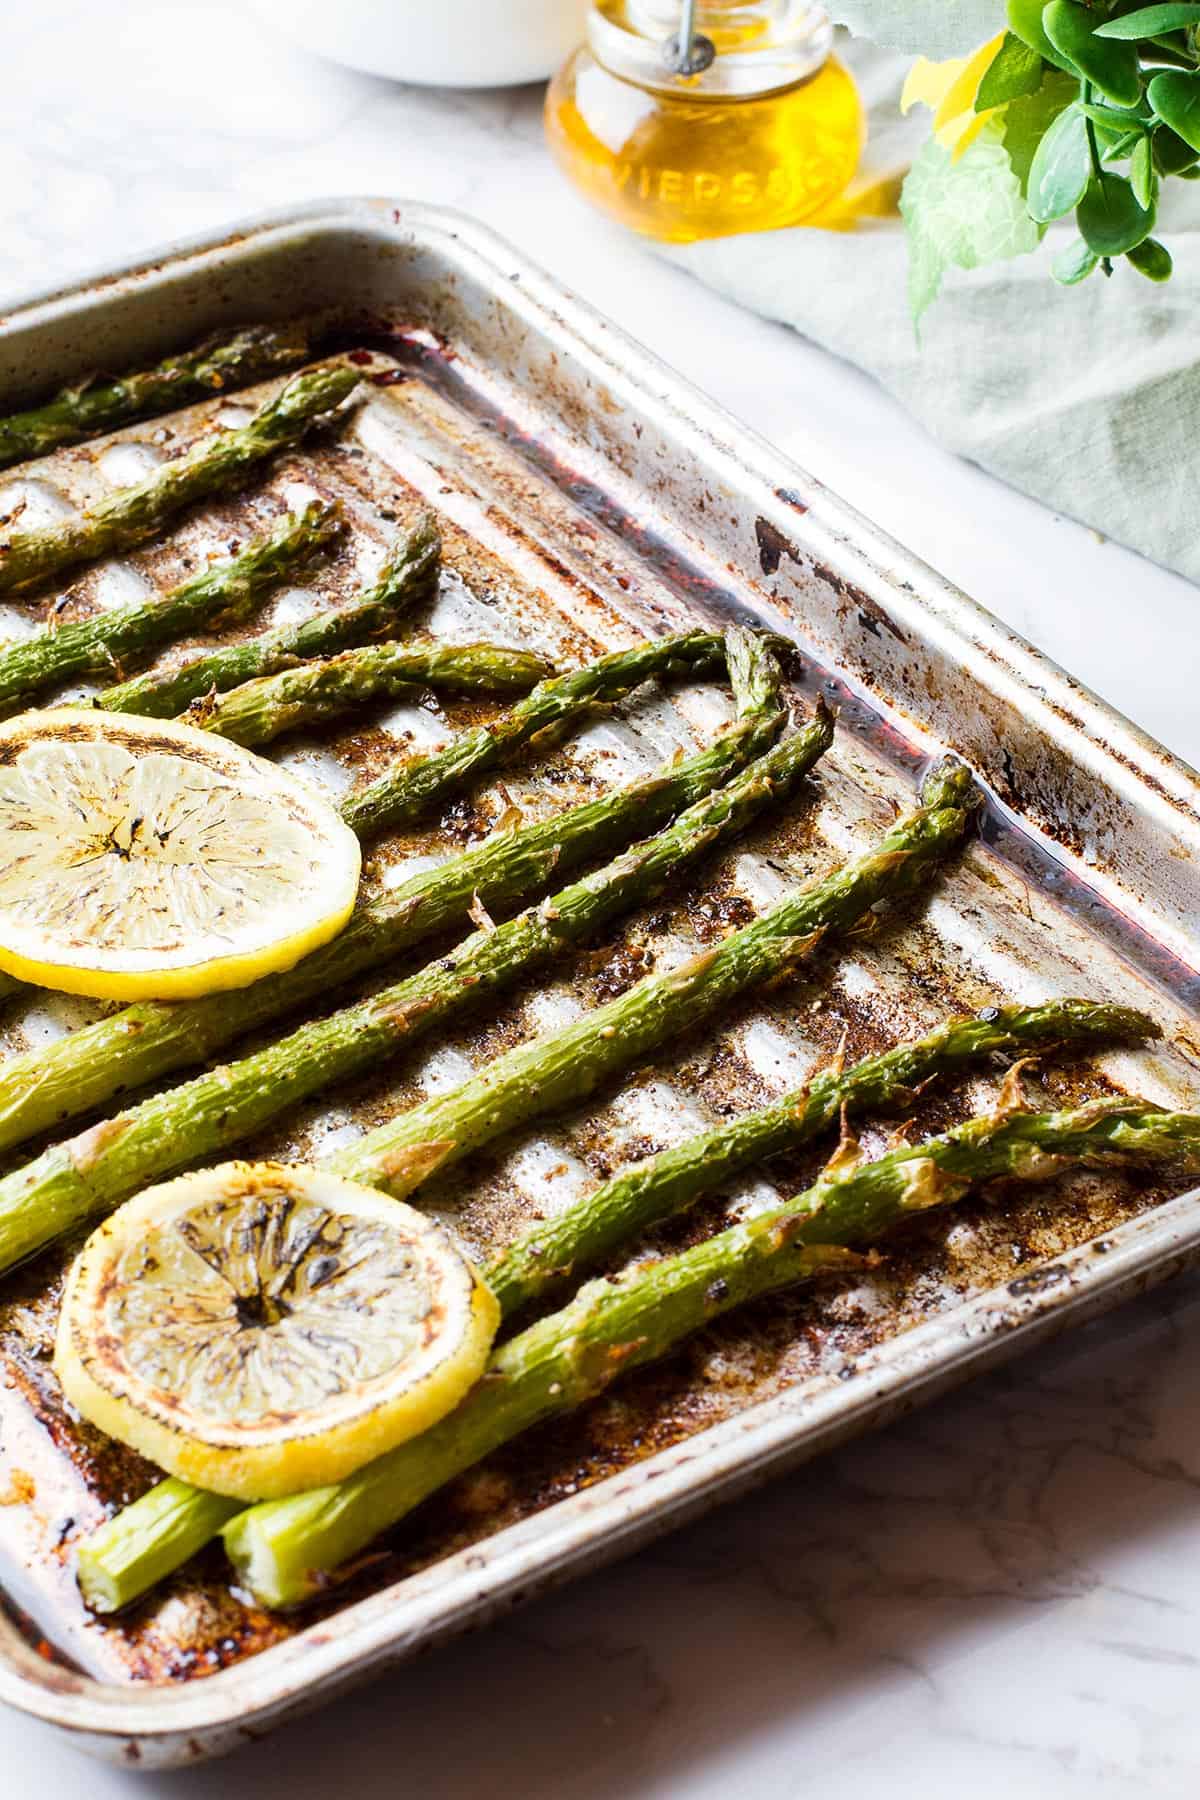 Old baking sheet with asparagus, backlighting.